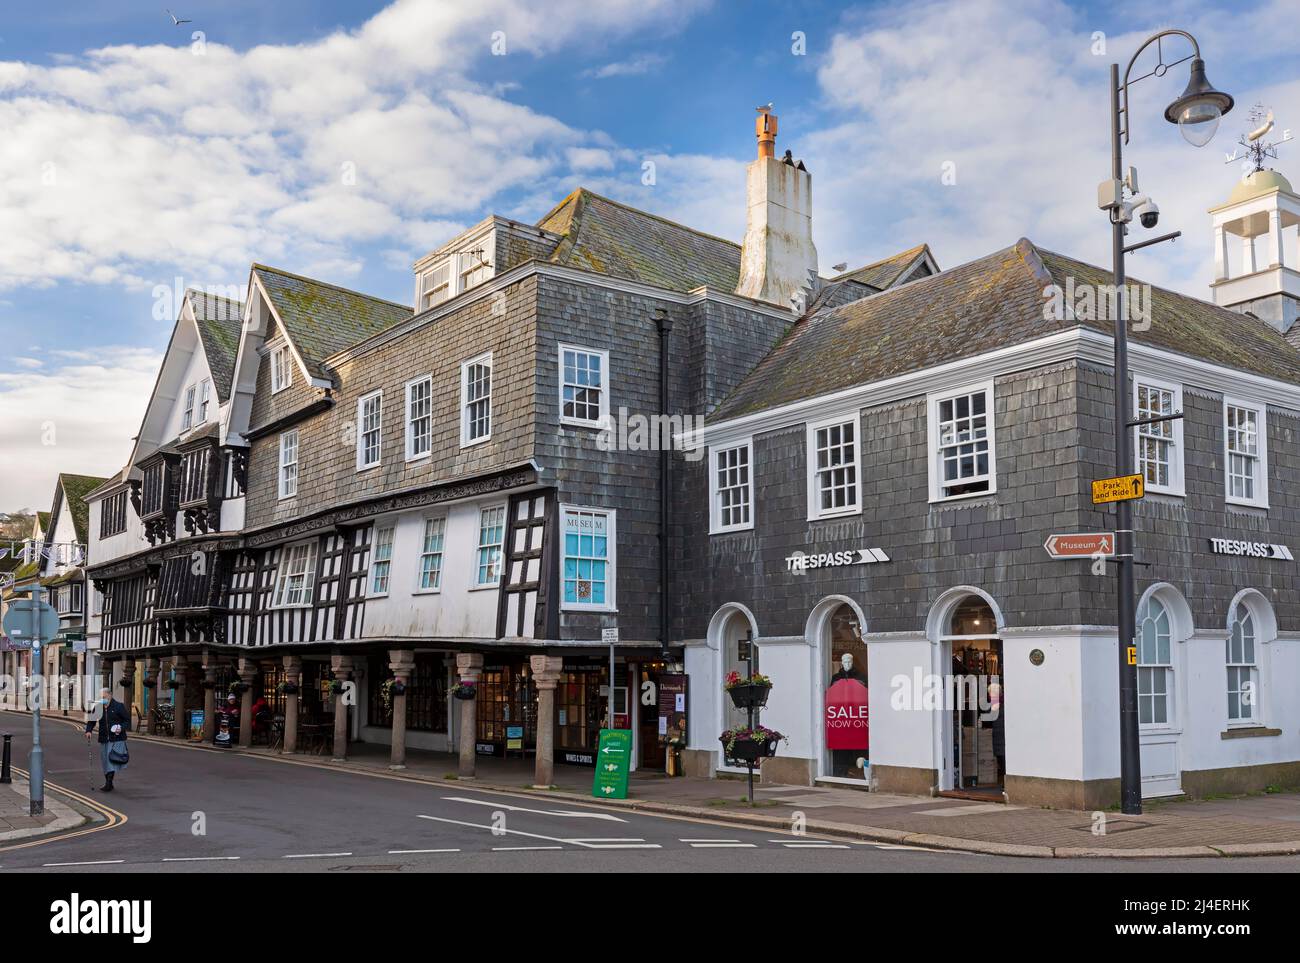 The Butterwalk, historic buildings in Dartmouth, South Hams, Devon. Granite columns hold up the wooden fascia of the Stuart houses. Stock Photo